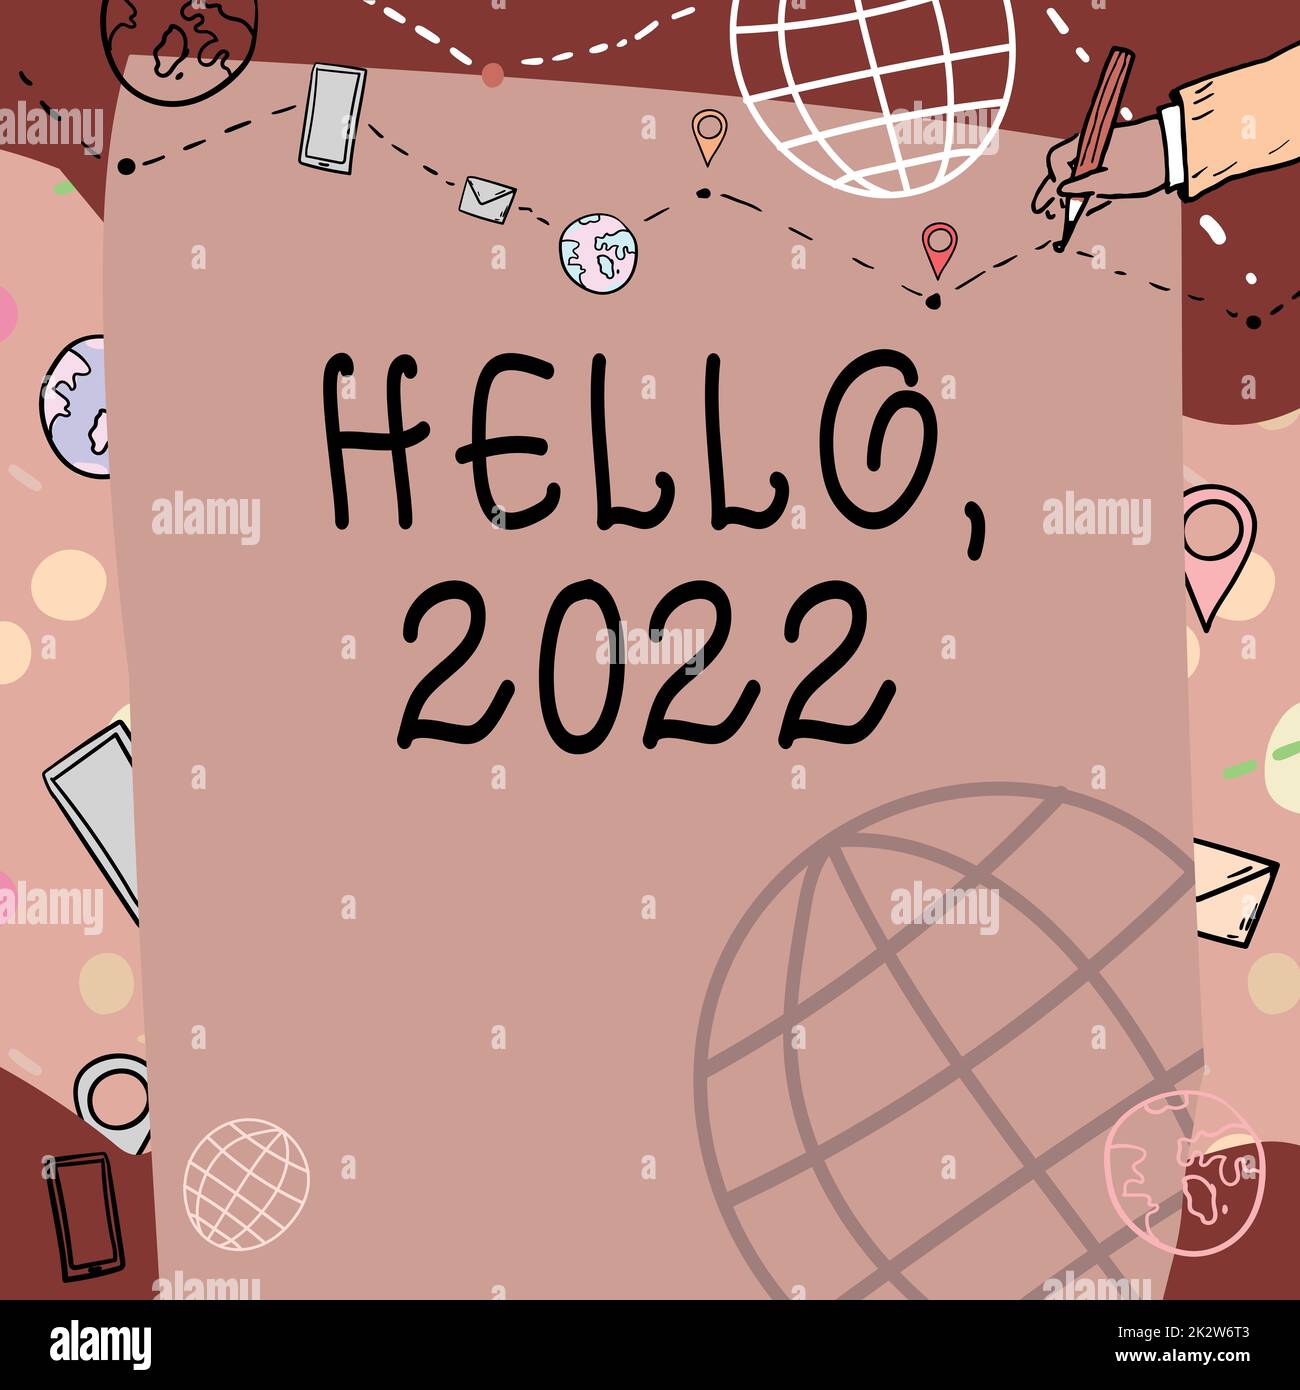 Text caption presenting Hello 2022. Internet Concept expression or gesture of greeting answering the telephone Plain Whiteboard With Hand Drawing Guide Line For Steps Over World Globe. Stock Photo